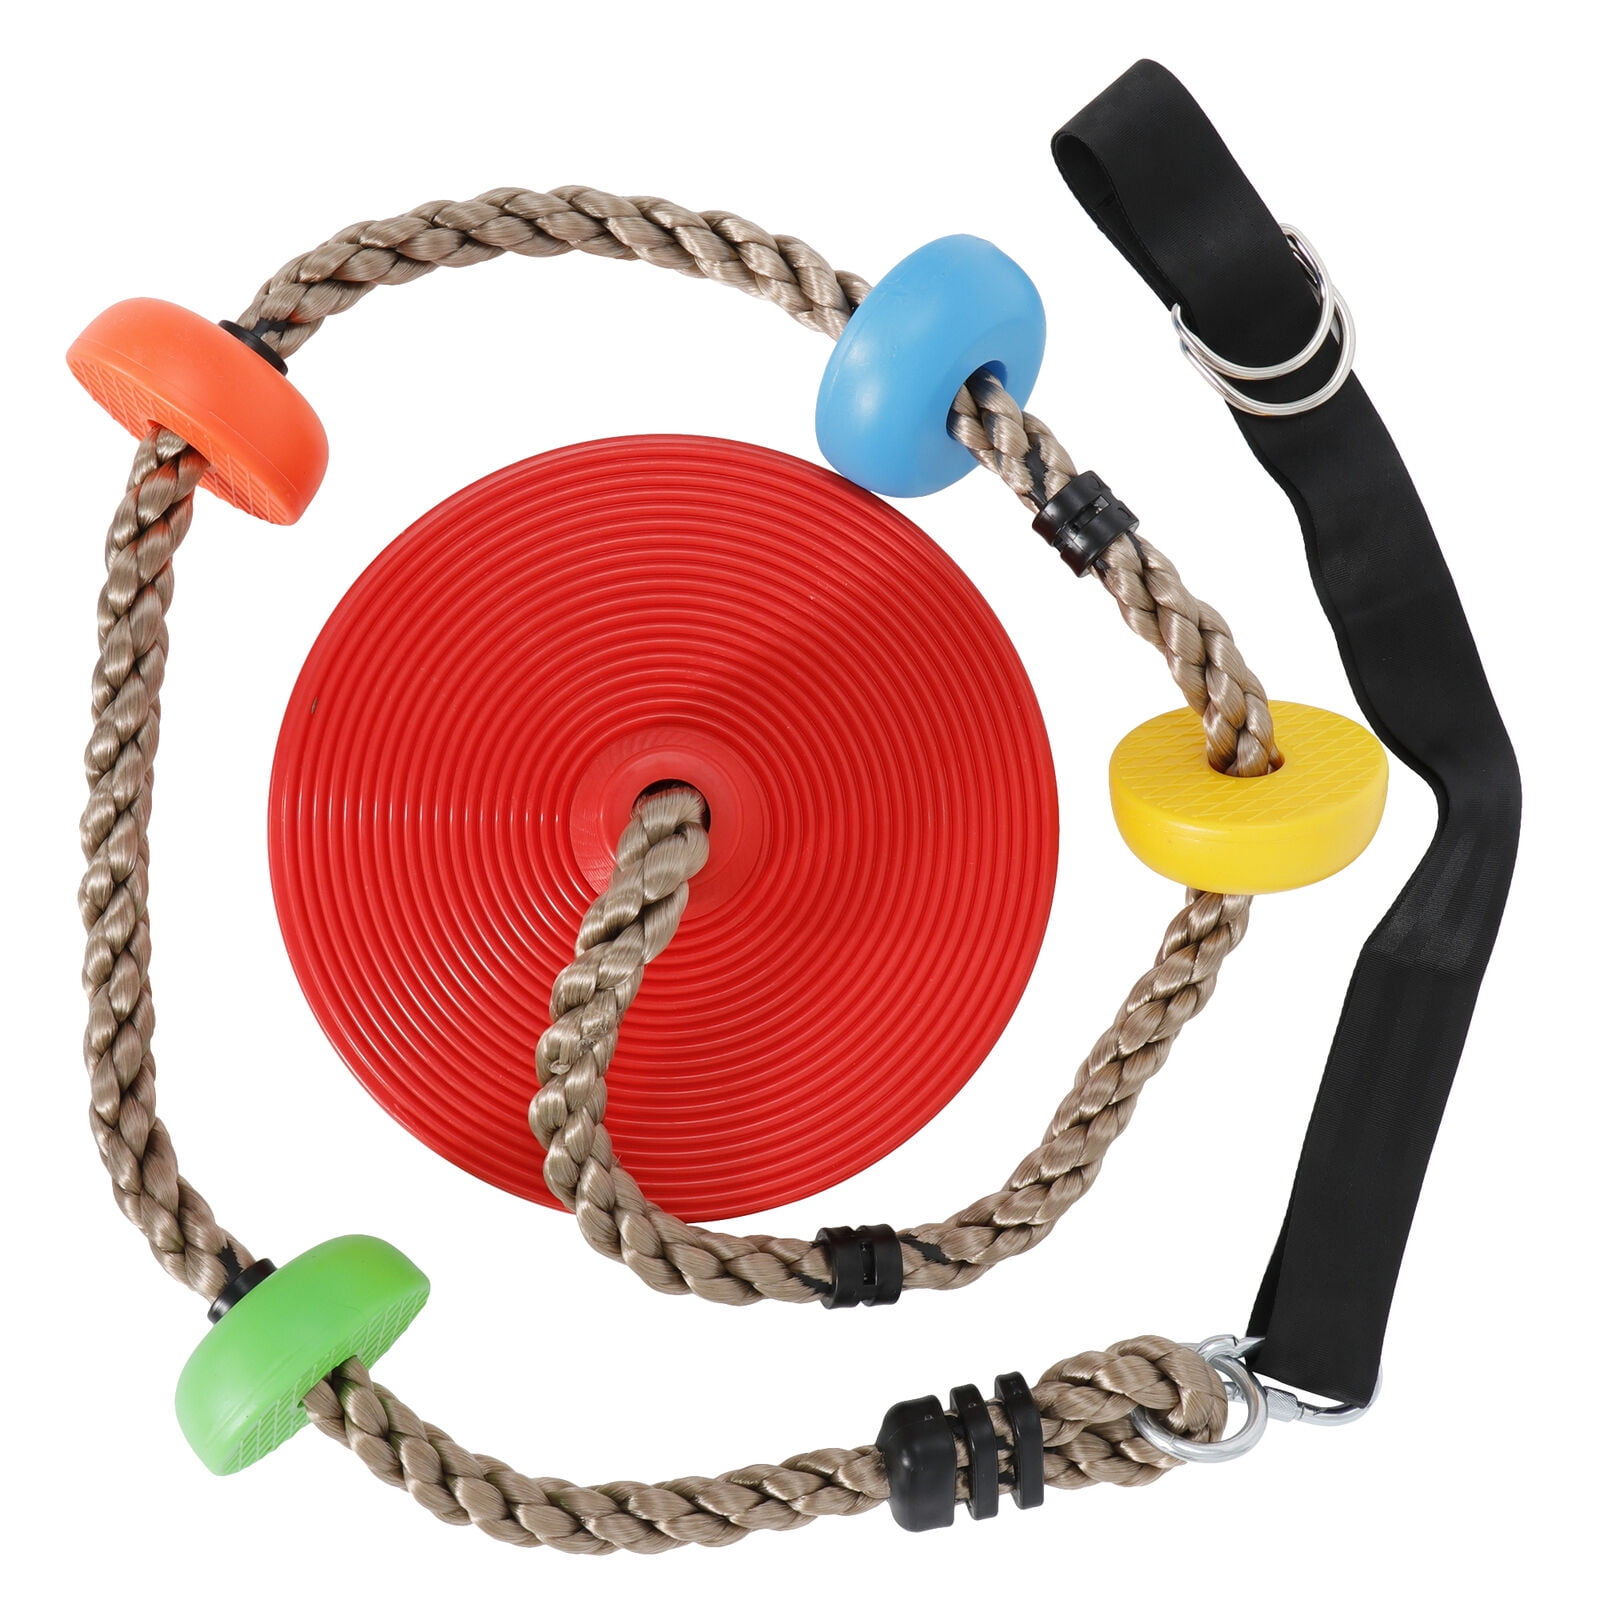 Children Swing Outdoor Includes 1 Rope Strap 1 M8 Carabiner for Your Swingset Child Swing Kids and Baby Swing Set for Kids 3 Years and up Jungle Swings Climbing Rope Swing with Platform Disc